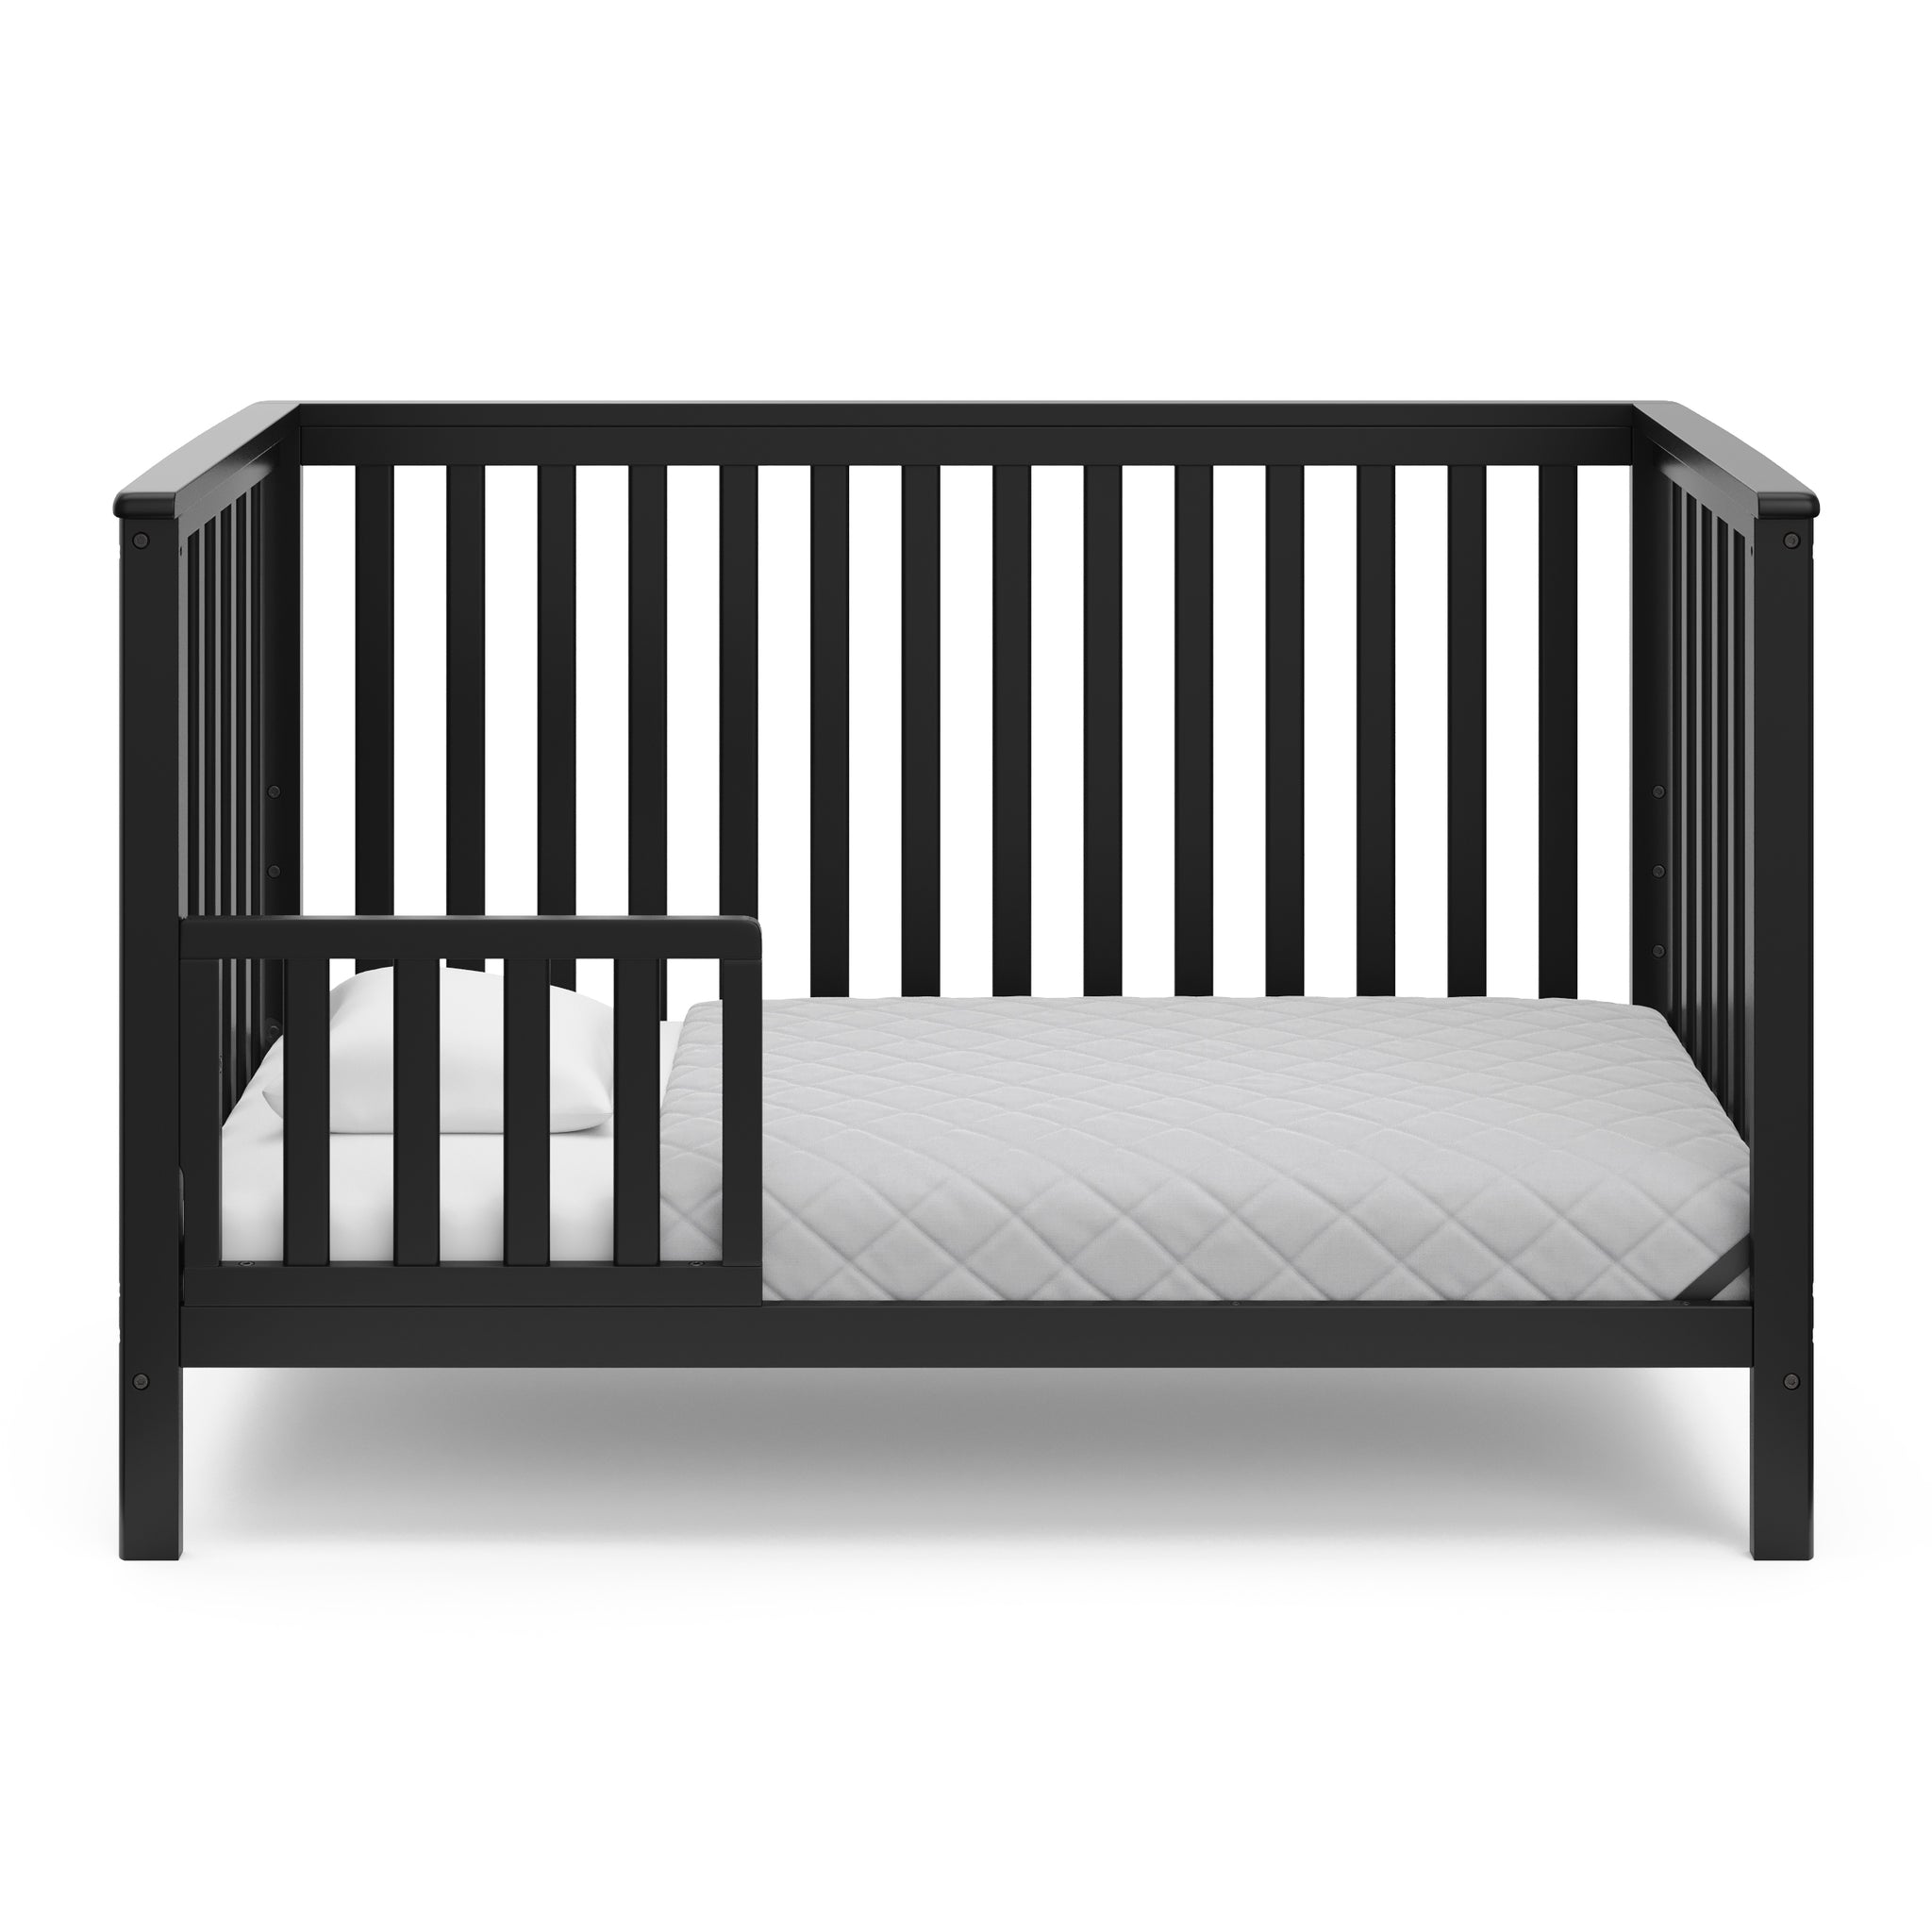 Black crib in toddler bed conversion with one safety guardrail